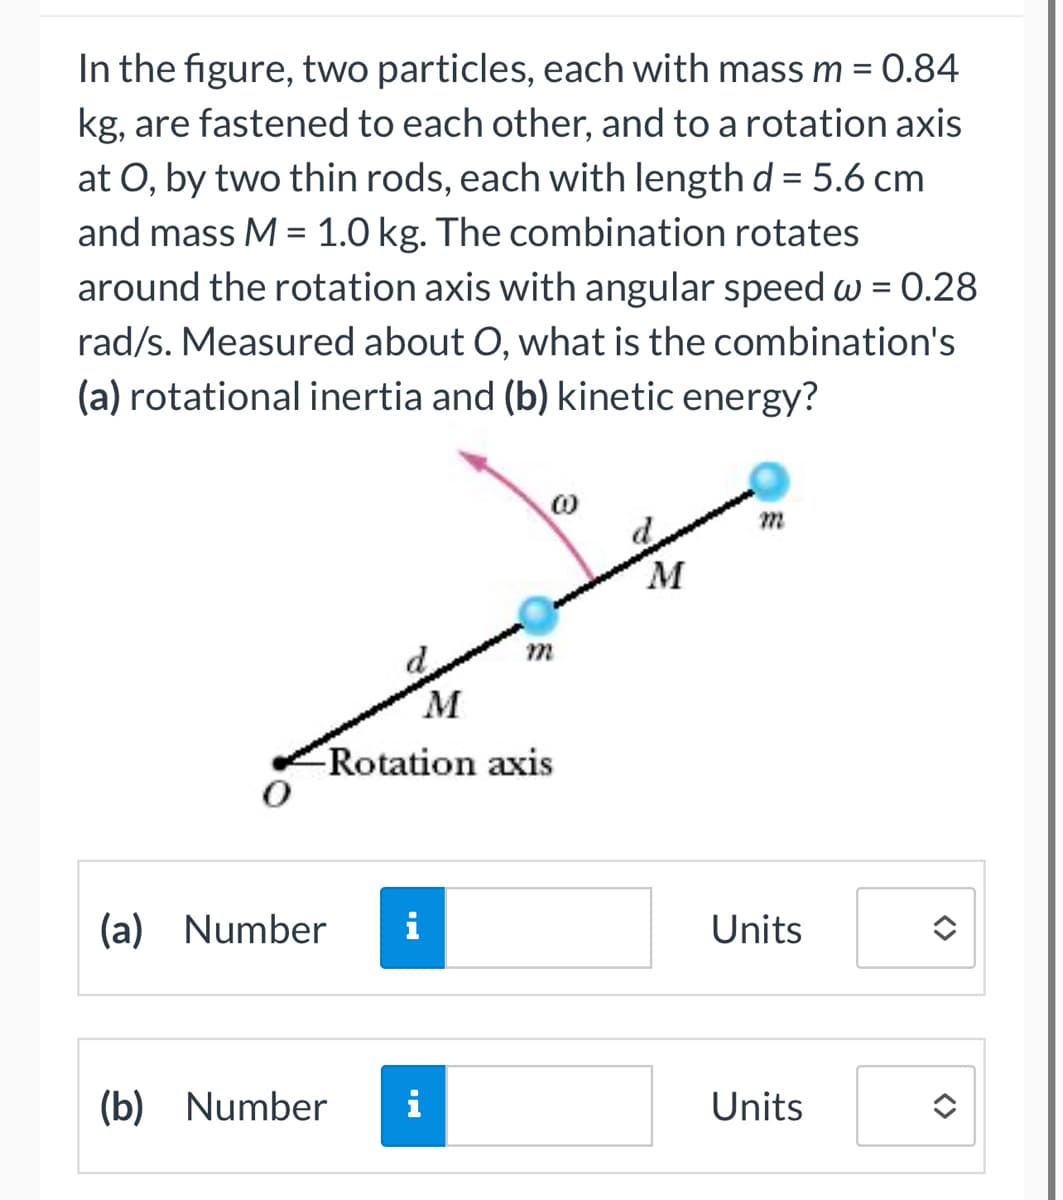 In the figure, two particles, each with mass m = 0.84
kg, are fastened to each other, and to a rotation axis
at O, by two thin rods, each with length d = 5.6 cm
and mass M = 1.0 kg. The combination rotates
around the rotation axis with angular speed w = 0.28
rad/s. Measured about O, what is the combination's
(a) rotational inertia and (b) kinetic energy?
(a) Number
8
M
Rotation axis
(b) Number i
M
m
Units
Units